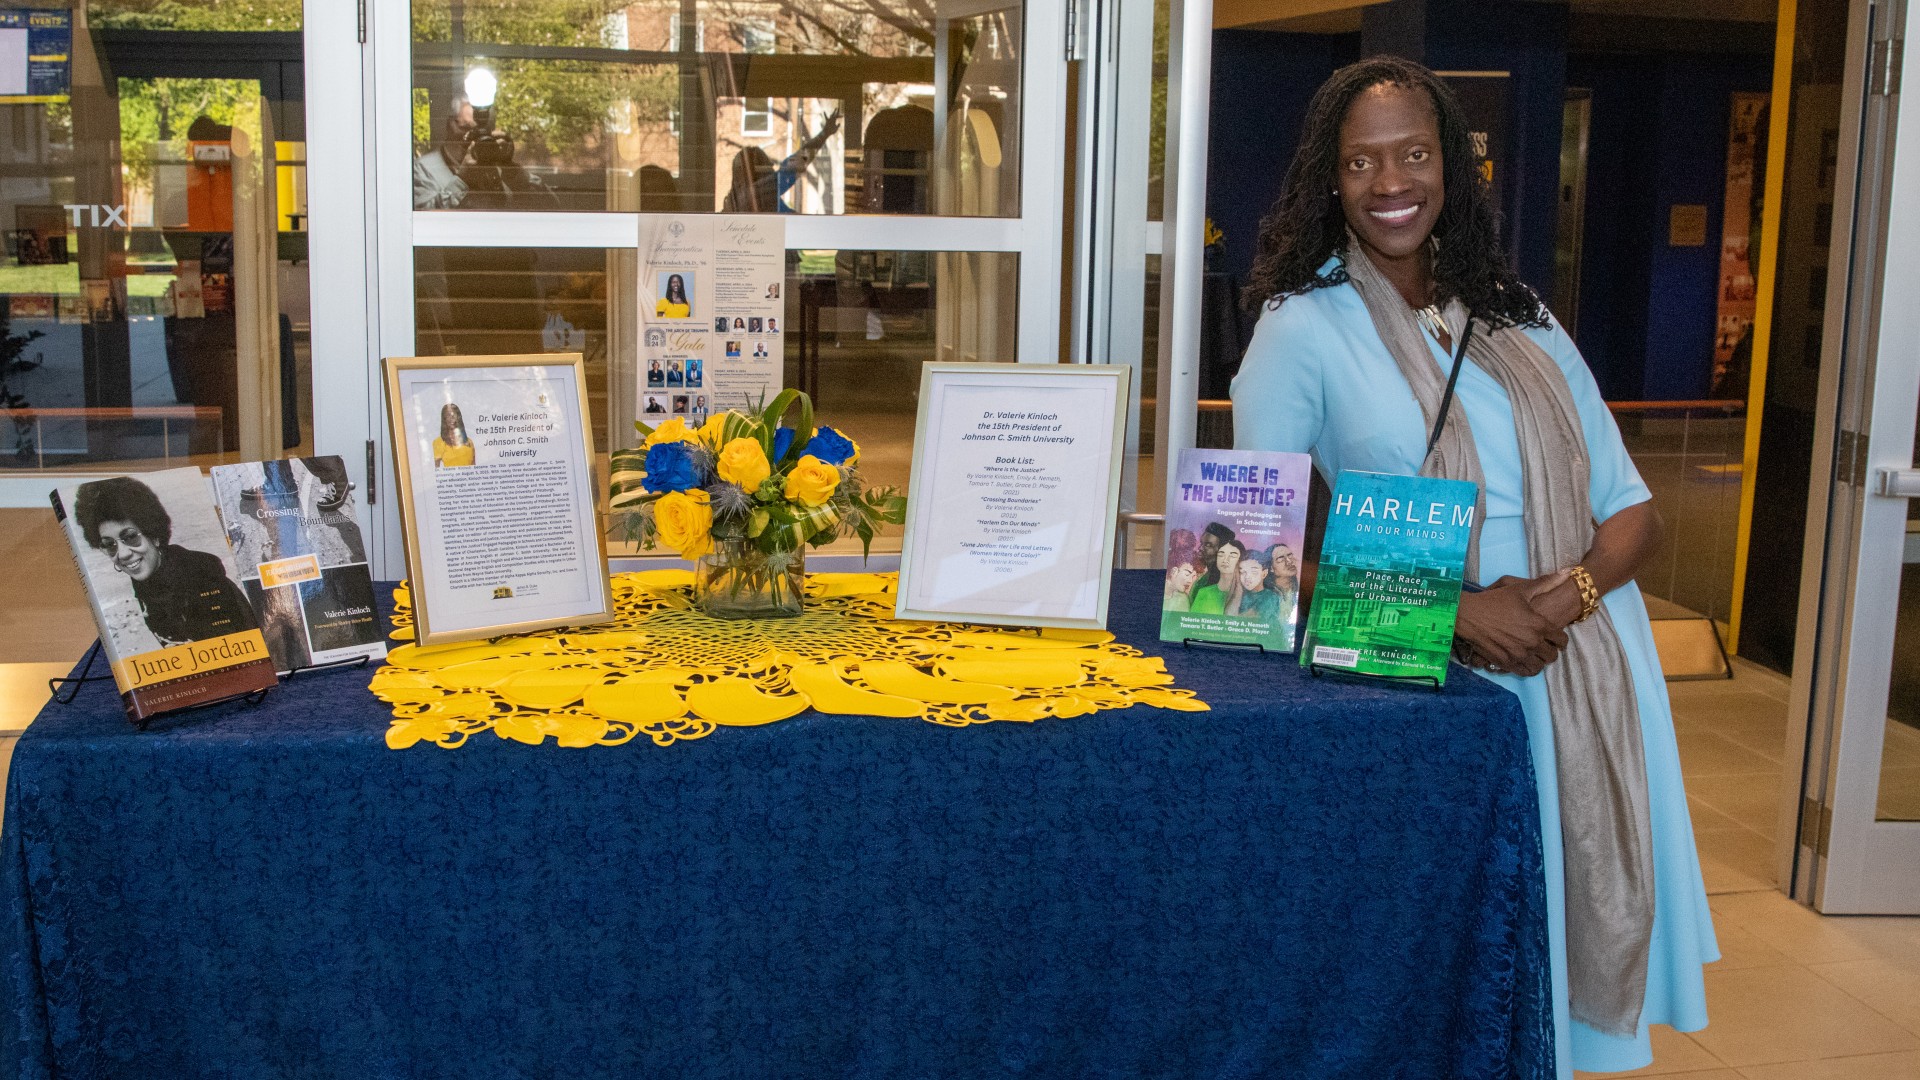 Dr. Kinloch poses with her books on display at the Friends of the Library event